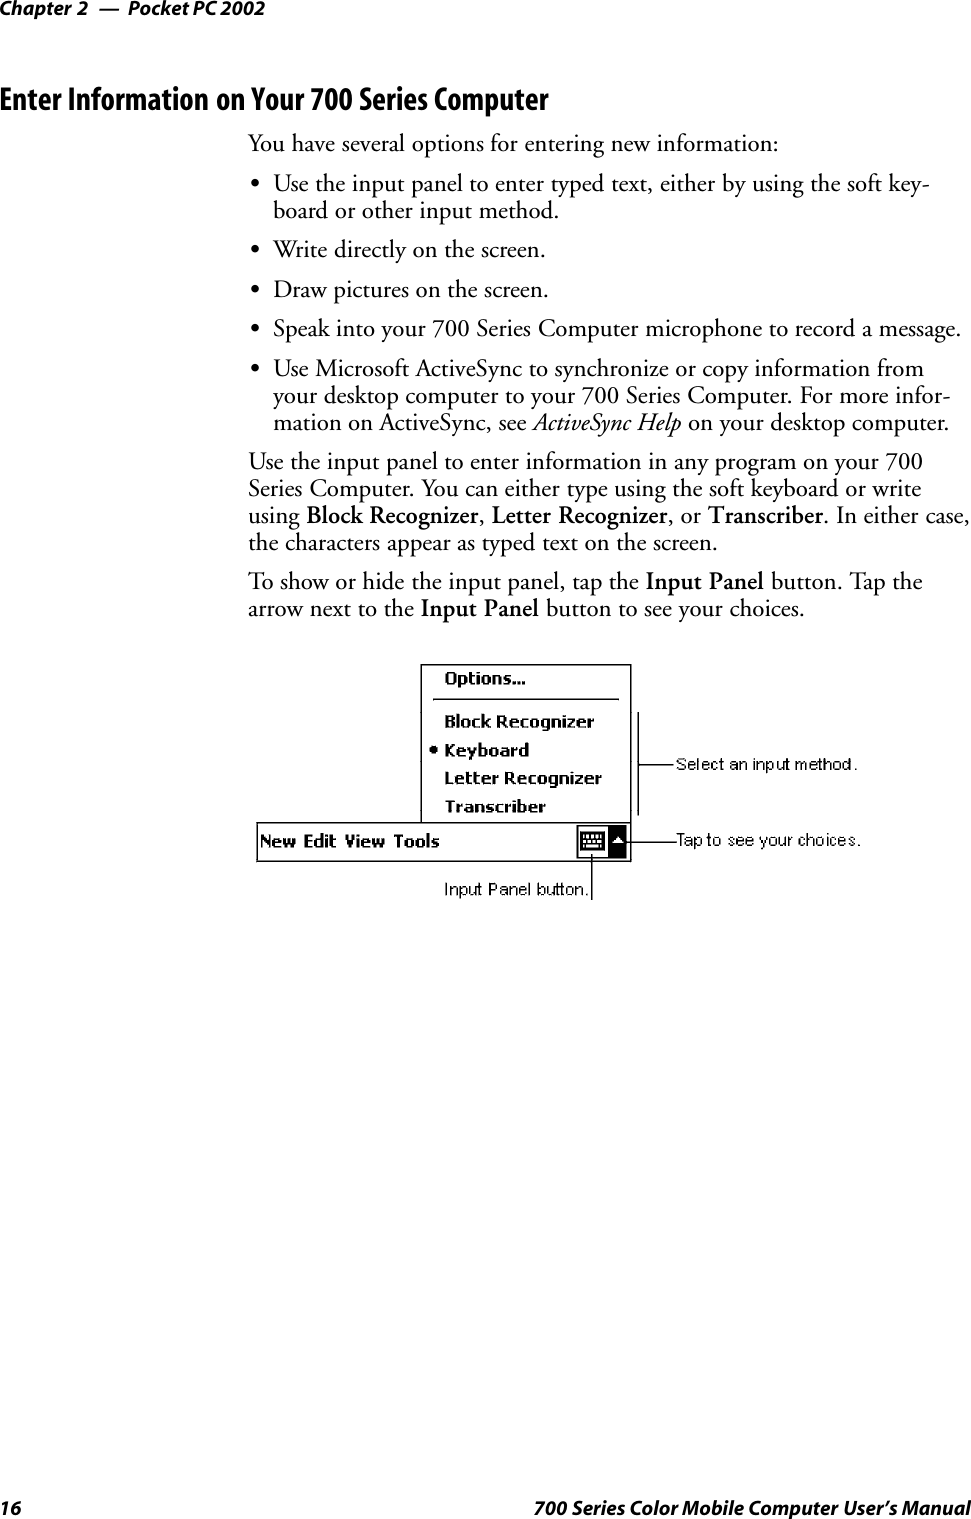 Pocket PC 2002Chapter —216 700 Series Color Mobile Computer User’s ManualEnter Information on Your 700 Series ComputerYou have several options for entering new information:SUse the input panel to enter typed text, either by using the soft key-board or other input method.SWrite directly on the screen.SDraw pictures on the screen.SSpeak into your 700 Series Computer microphone to record a message.SUse Microsoft ActiveSync to synchronize or copy information fromyour desktop computer to your 700 Series Computer. For more infor-mation on ActiveSync, see ActiveSync Help on your desktop computer.Use the input panel to enter information in any program on your 700Series Computer. You can either type using the soft keyboard or writeusing Block Recognizer,Letter Recognizer,orTranscriber. In either case,the characters appear as typed text on the screen.To show or hide the input panel, tap the Input Panel button. Tap thearrow next to the Input Panel button to see your choices.